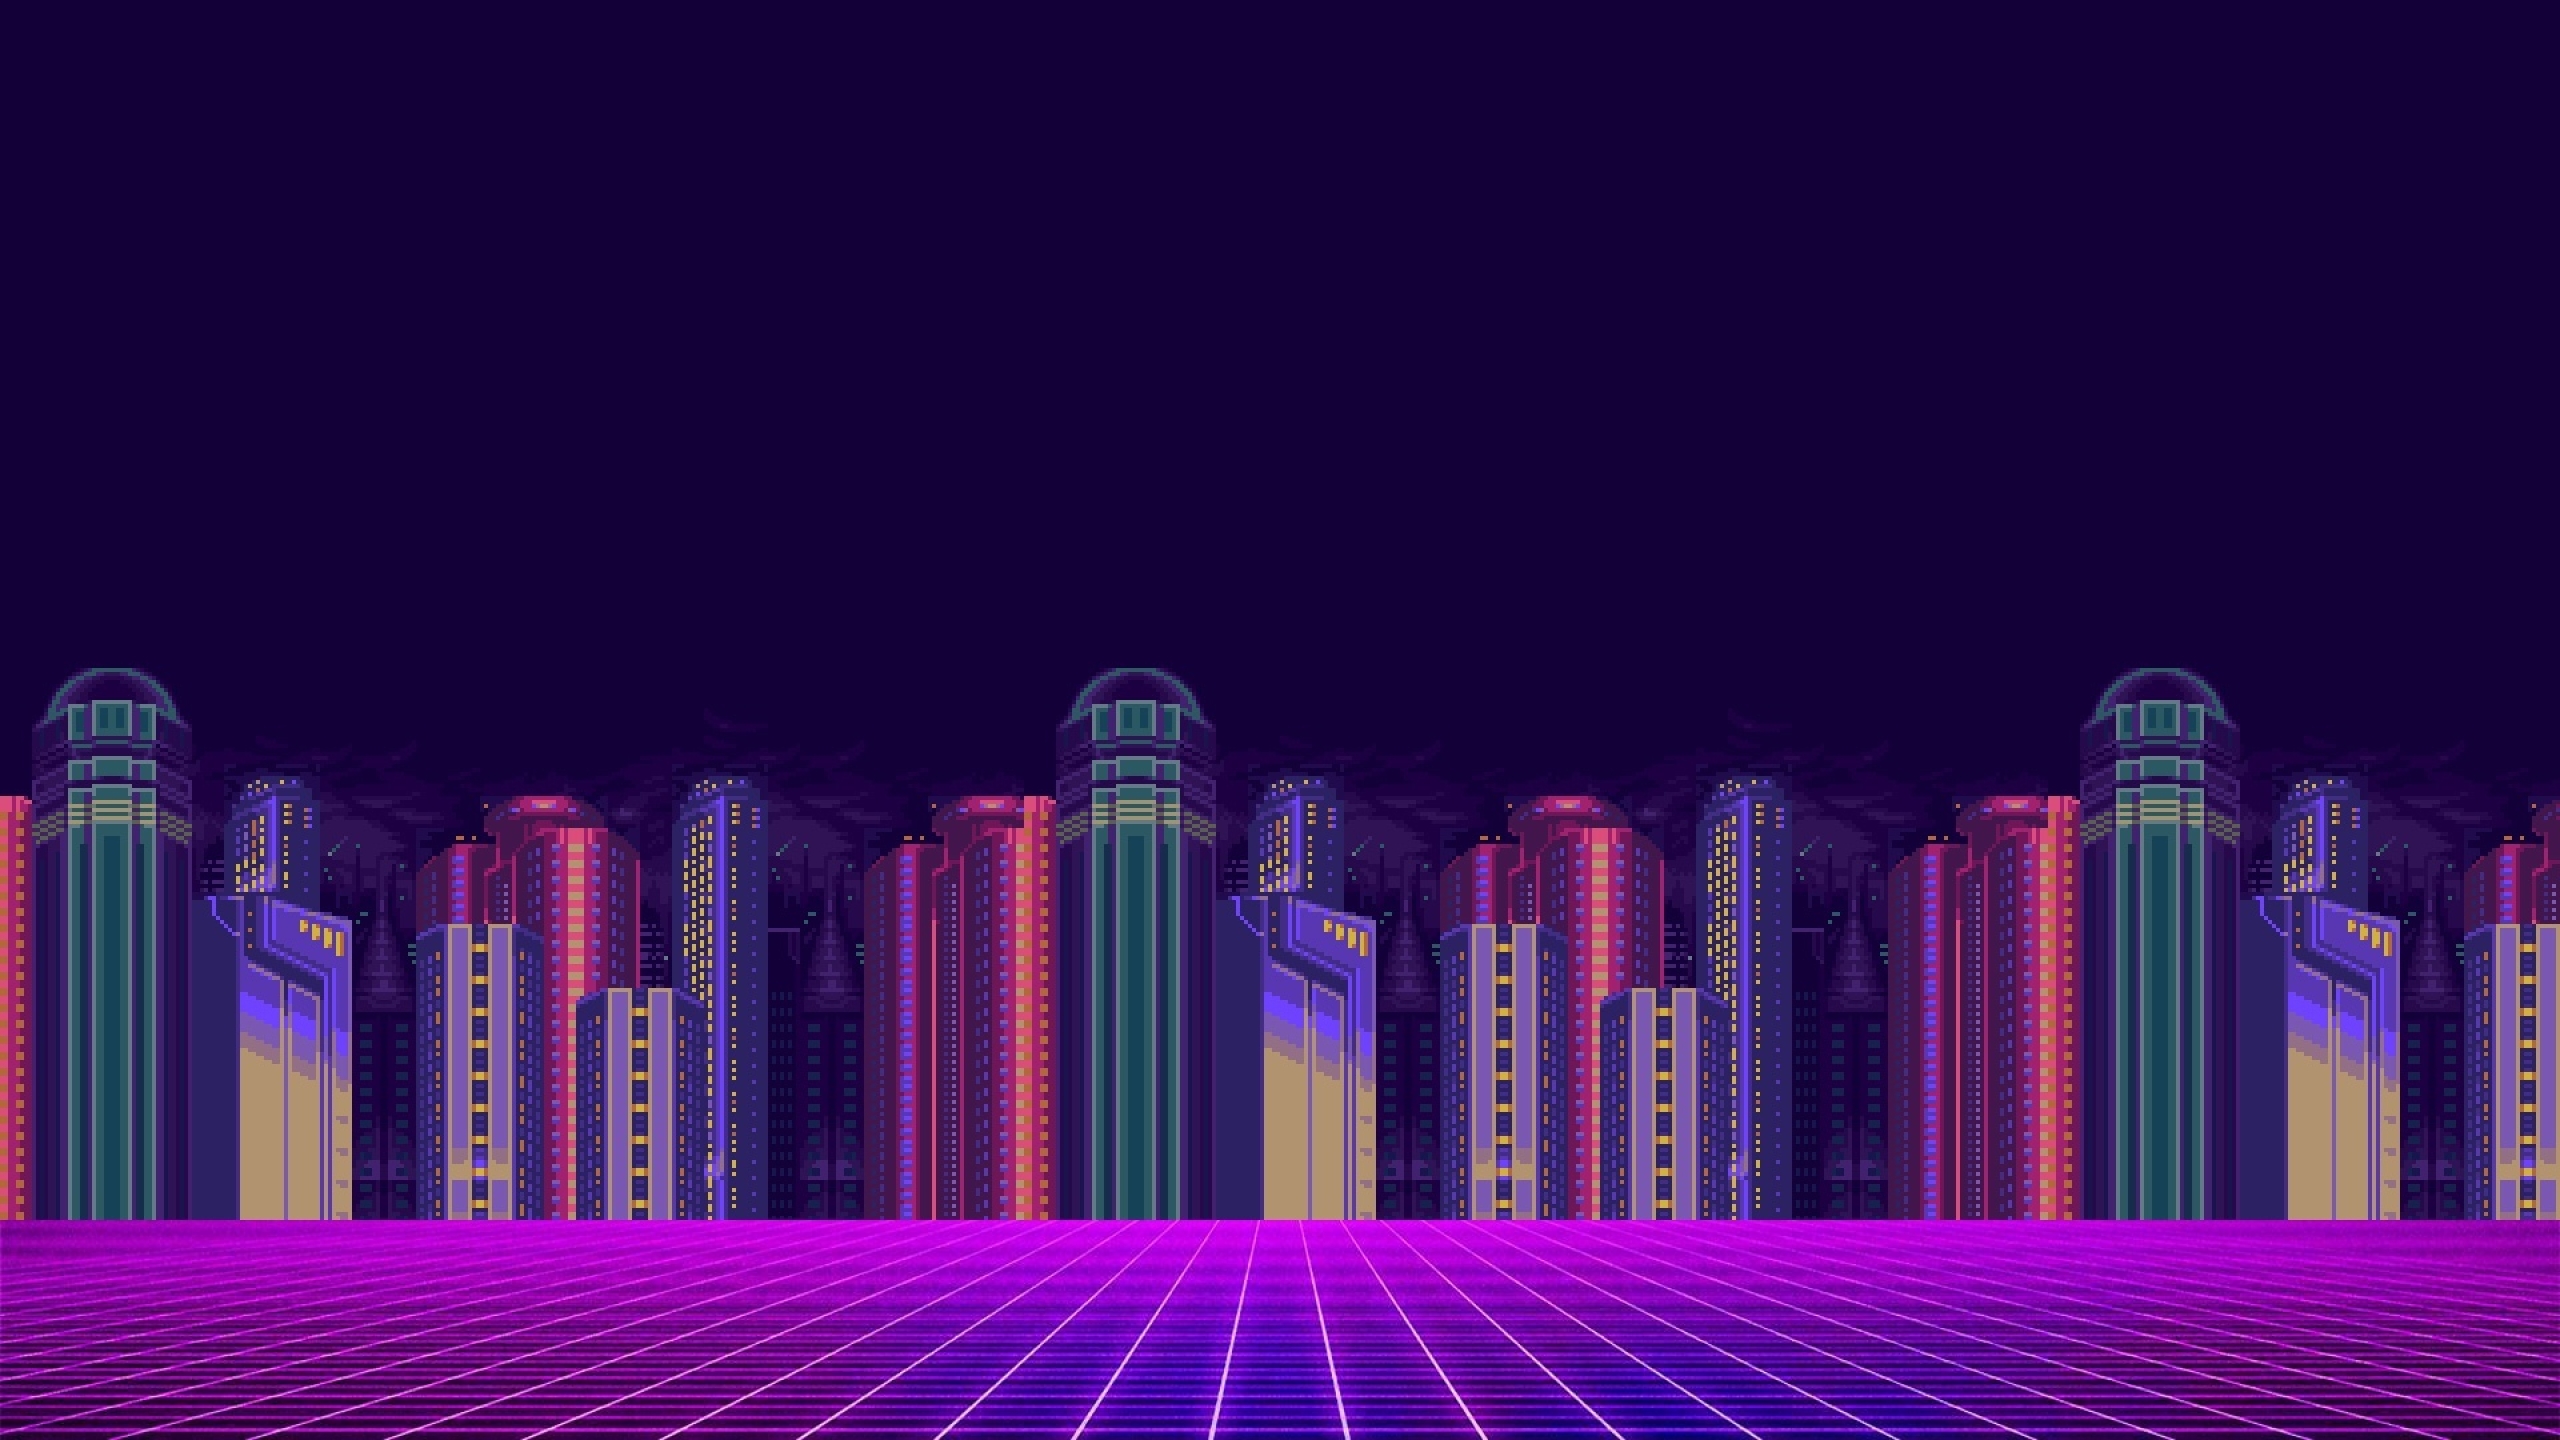 2560x1440 Synthwave 8 Bit Pixel Cityscape 1440p Resolution Wallpaper Hd Artist 4k Wallpapers Images Photos And Background